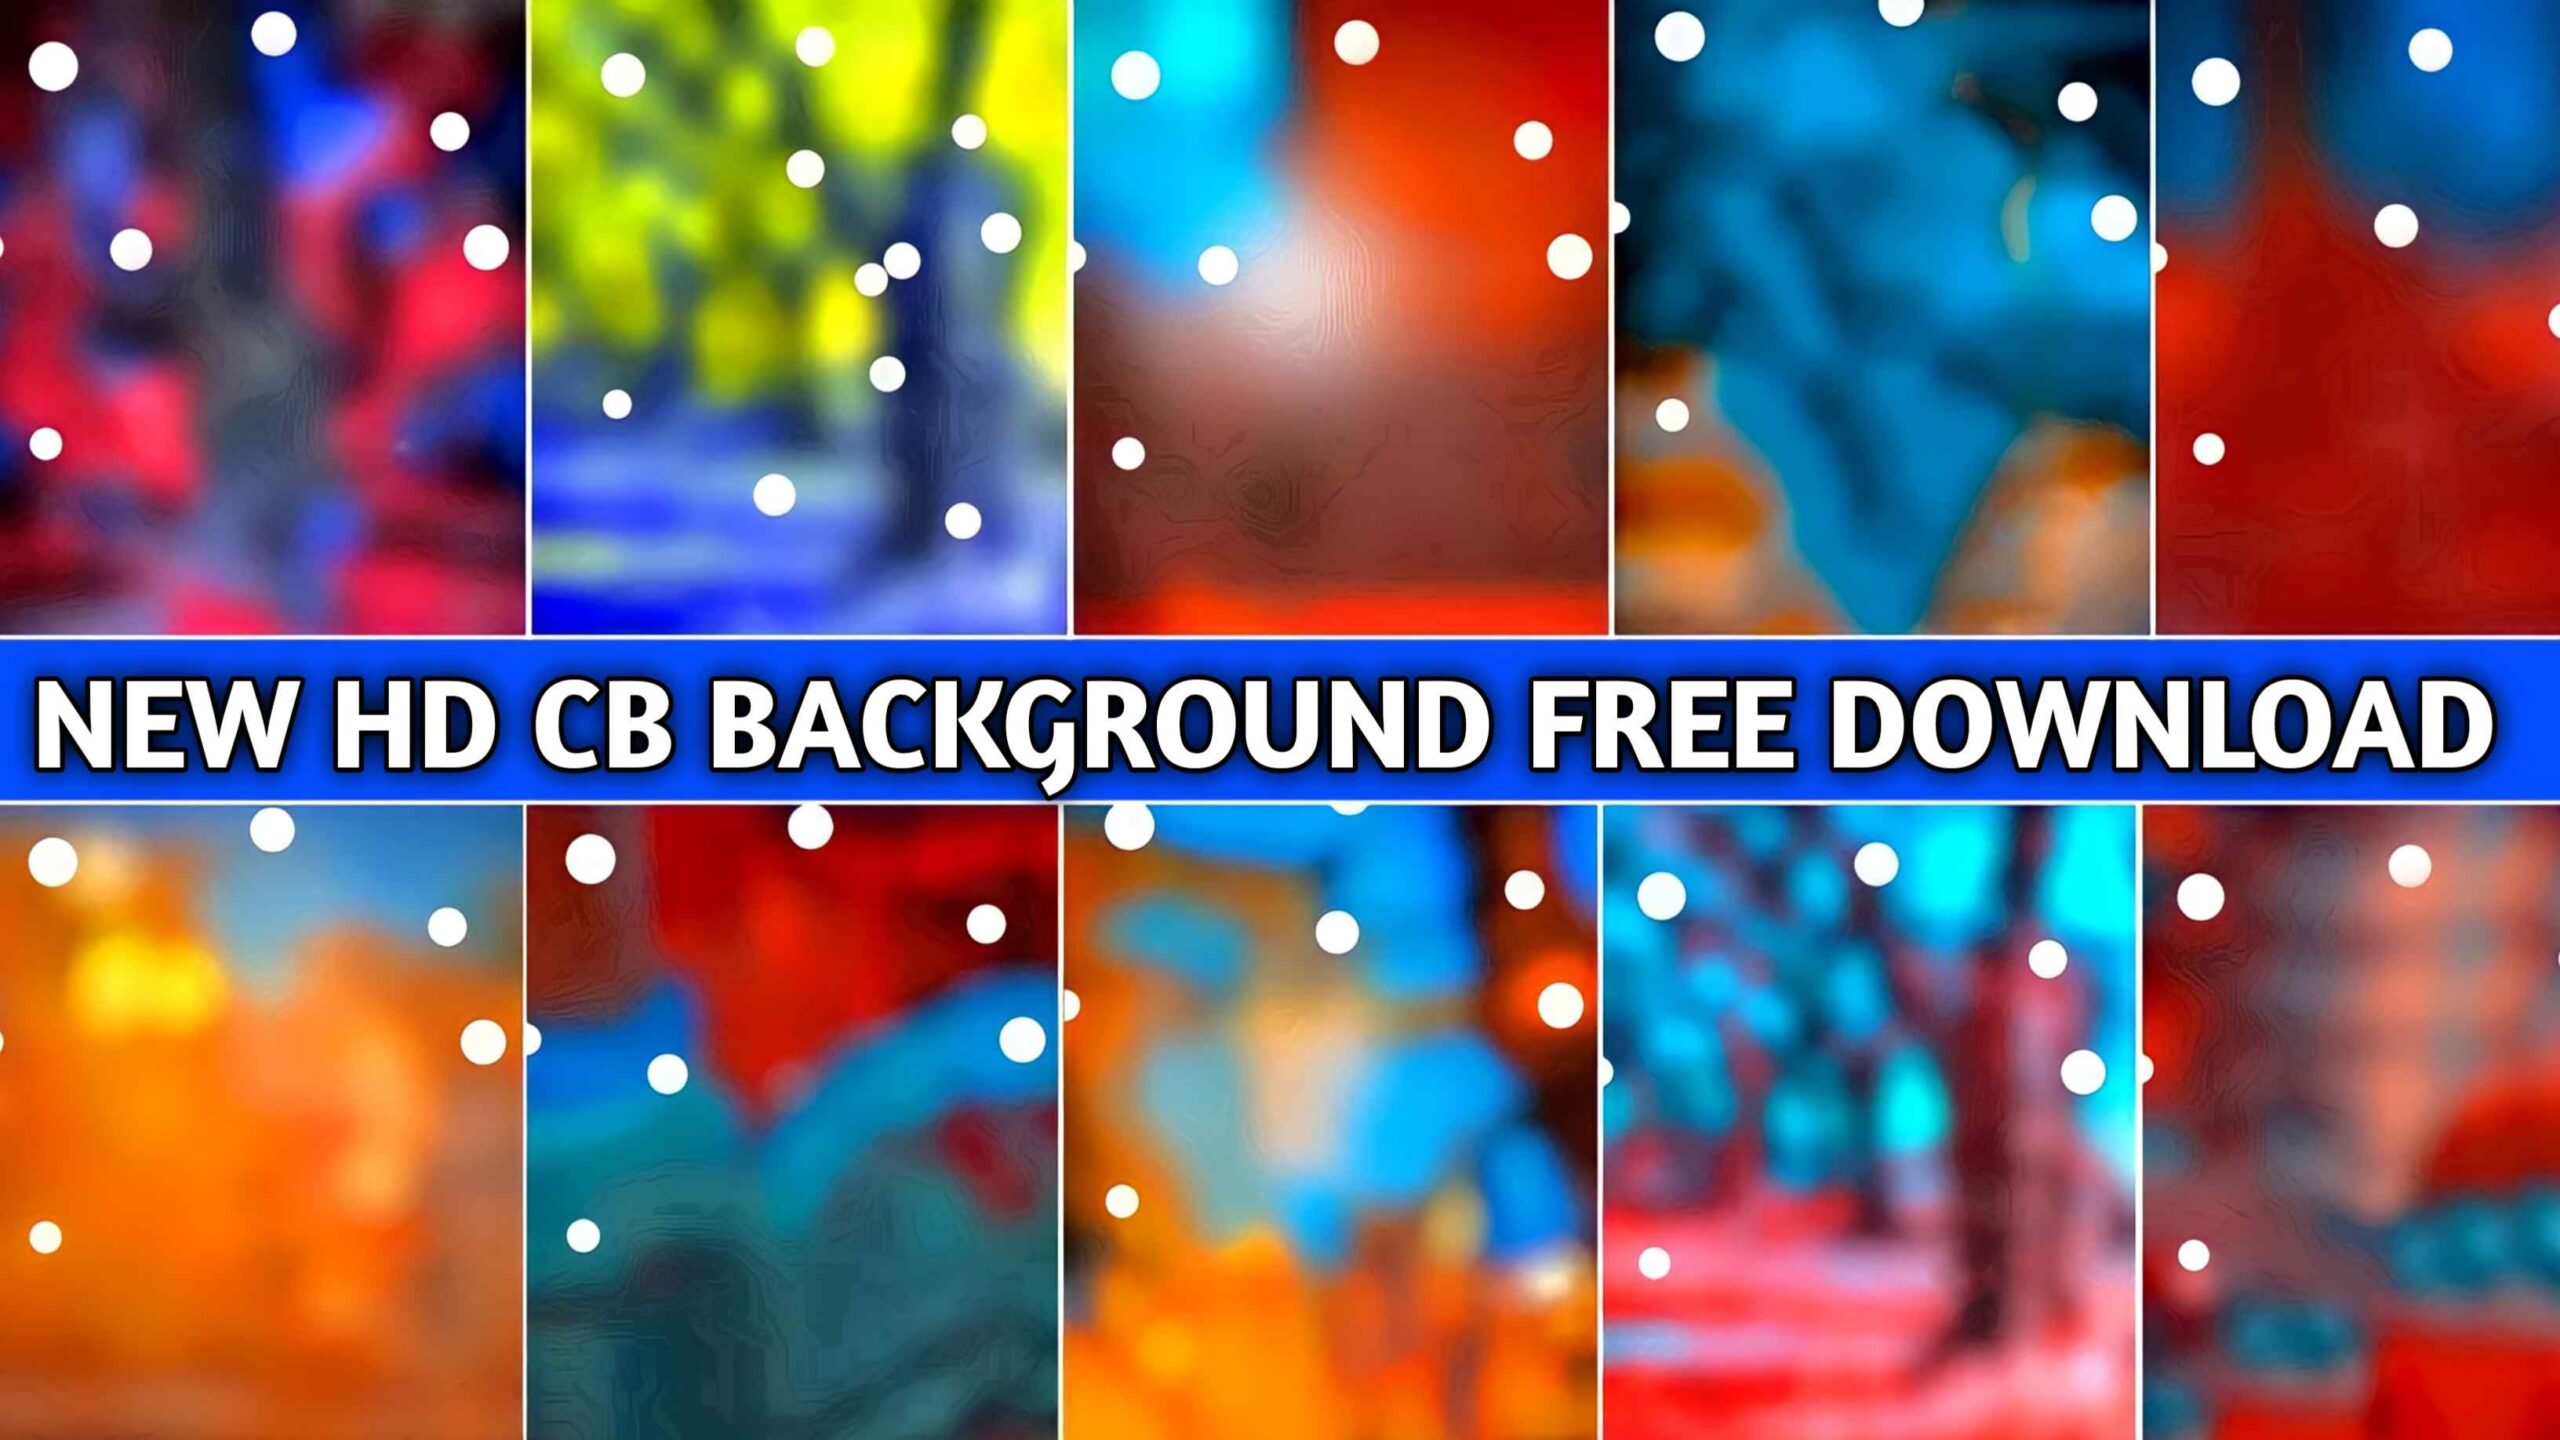 HD CB Backgrounds For Photo Editing Download Free - MUNAWAR EDITS